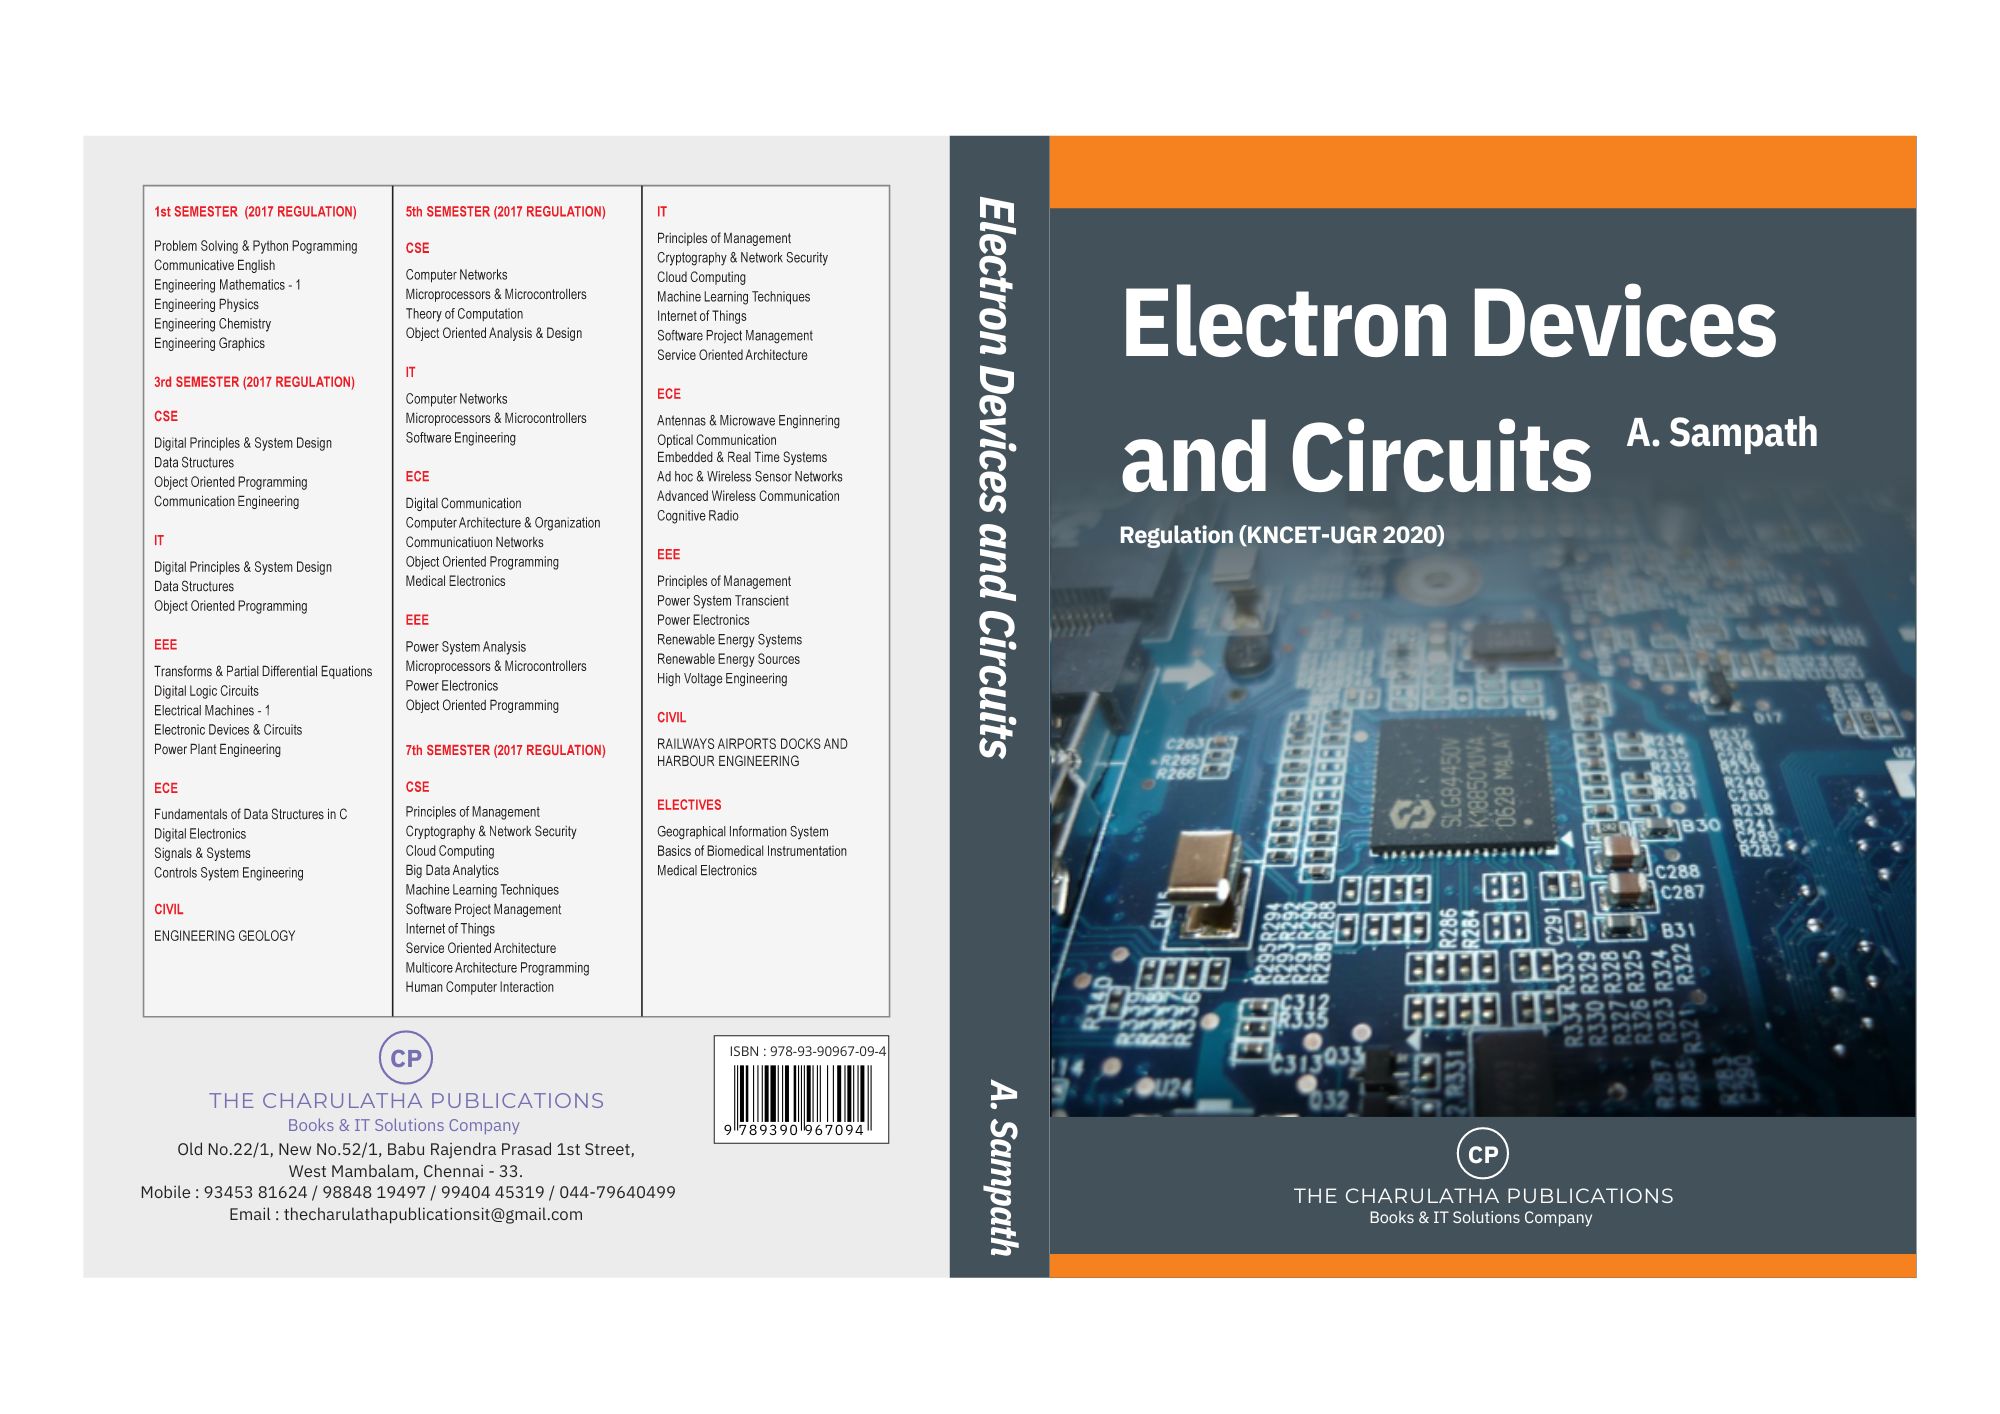 The charulatha publications Electron devices and circuits